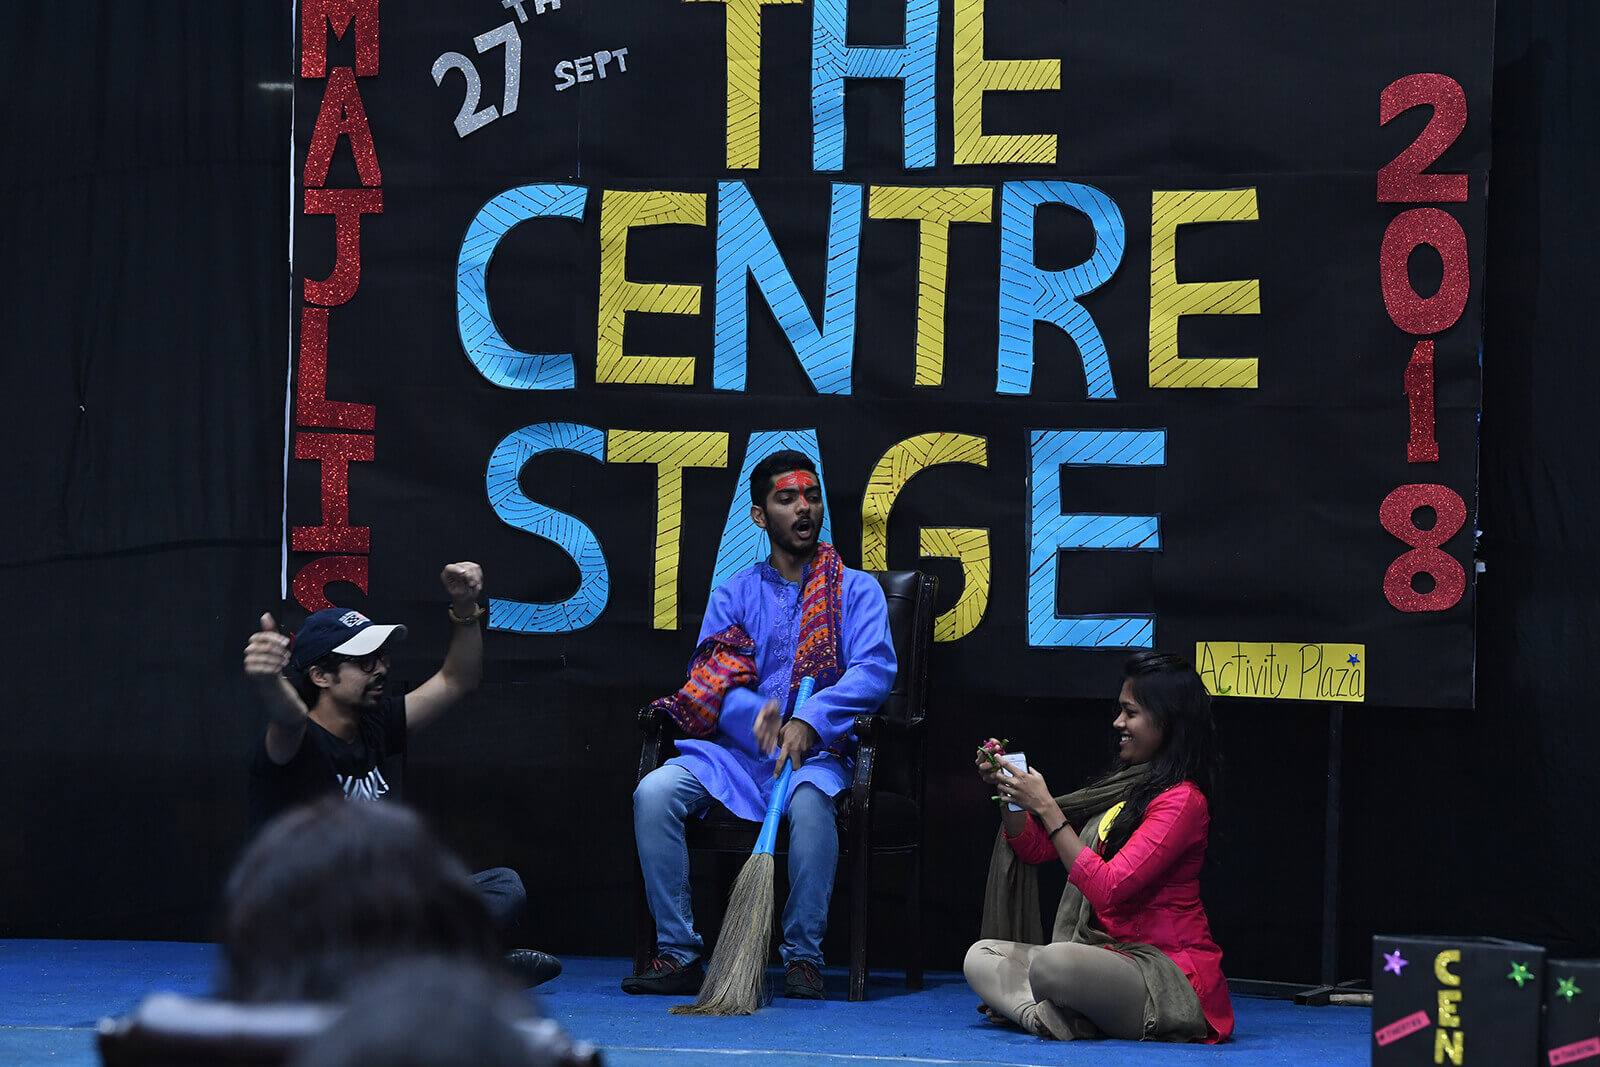 The Center Stage- BIMTECH